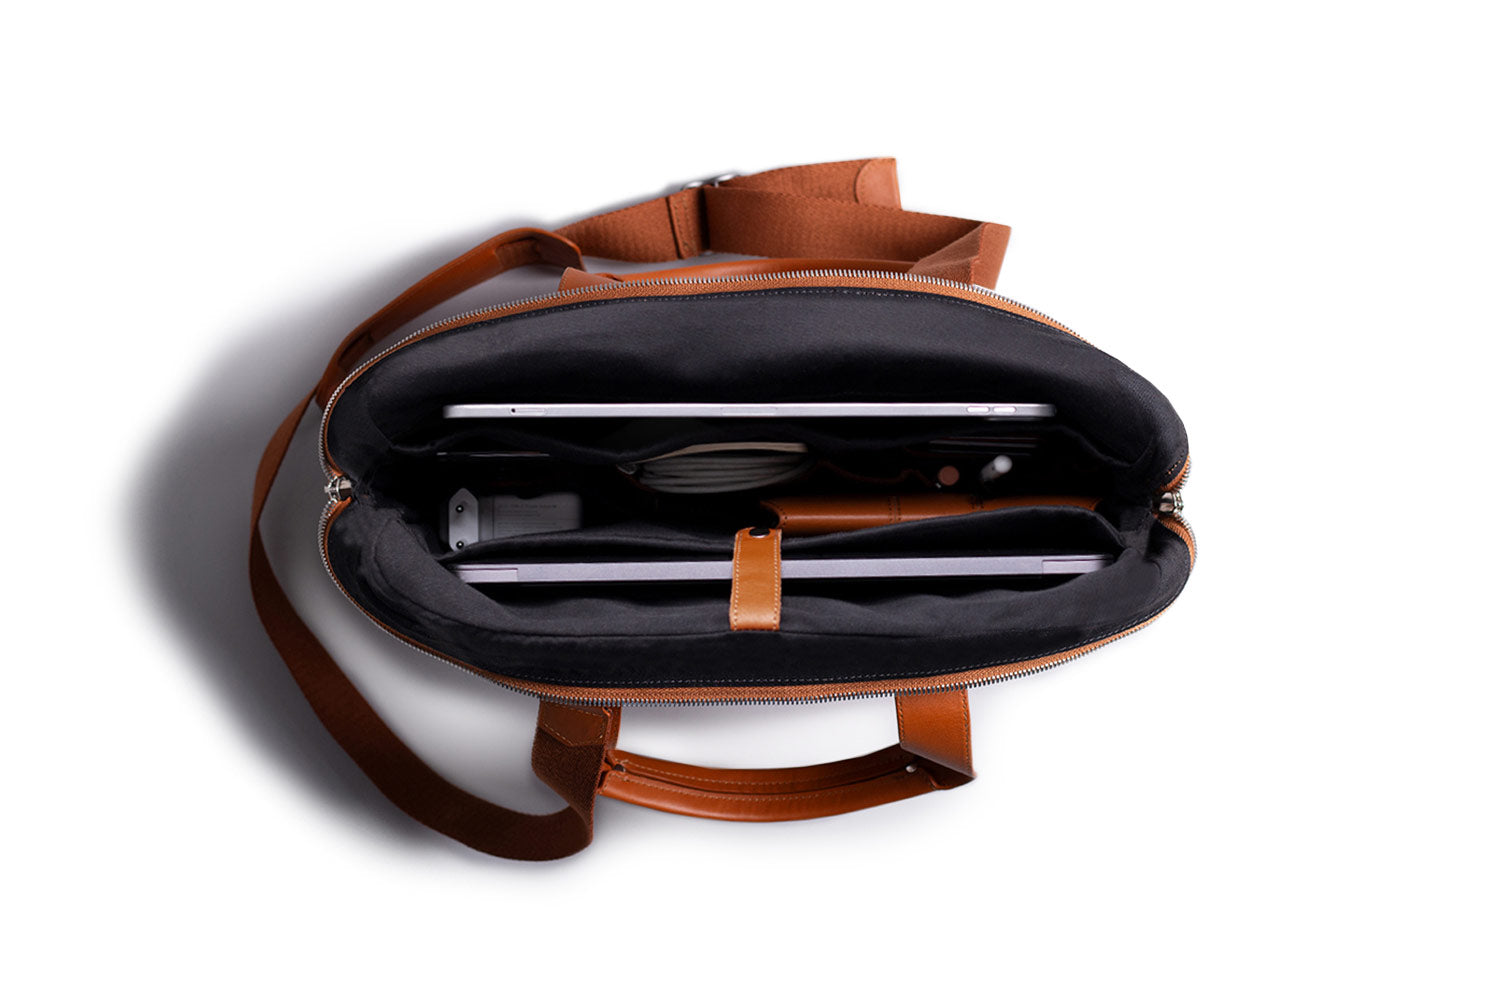 topdown view of Harber London briefcase. Image via Harber London.